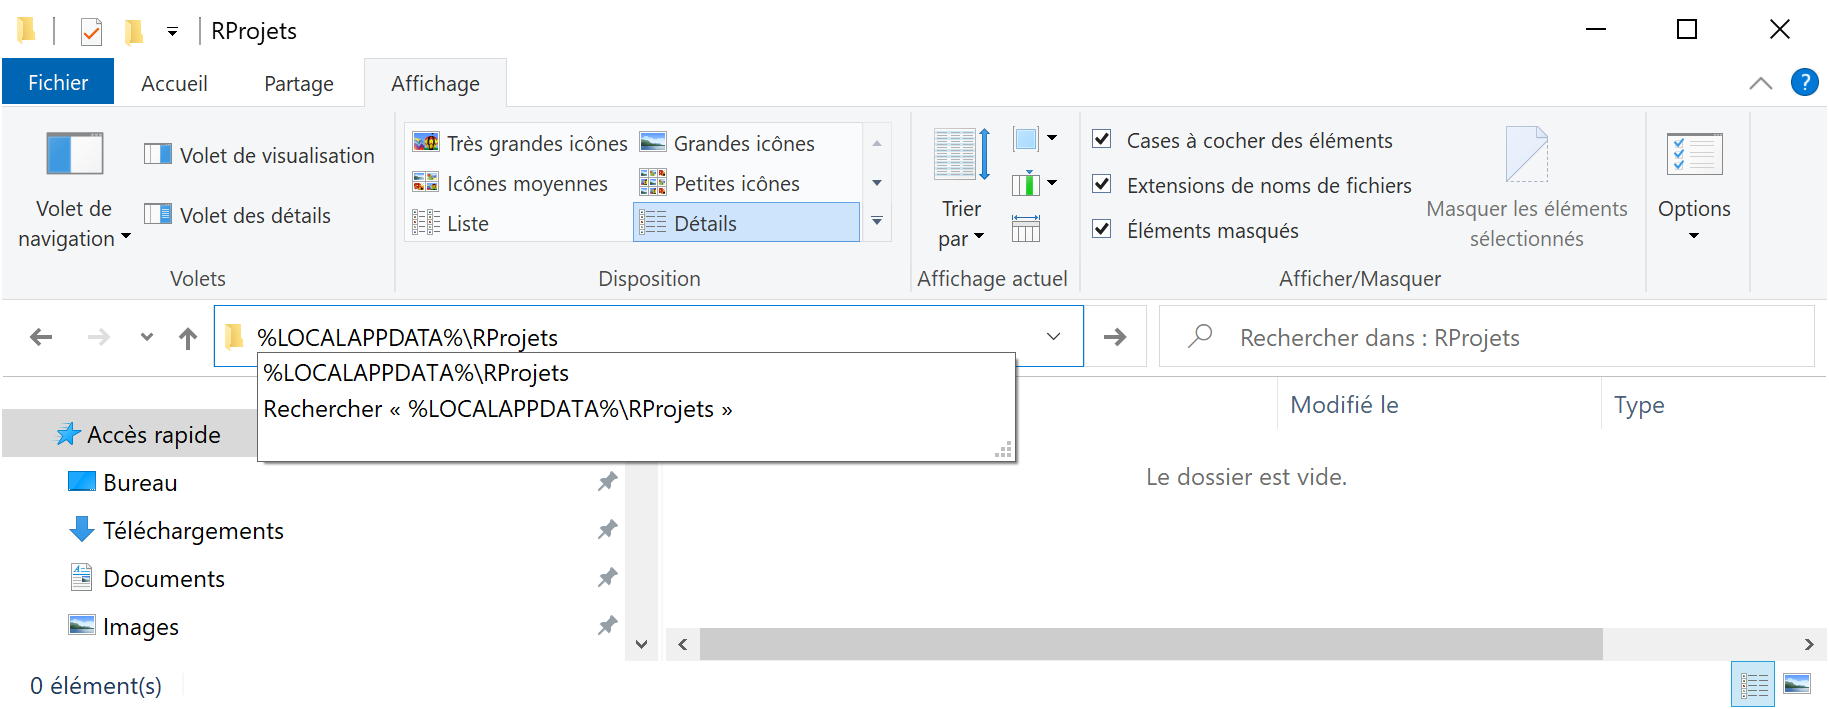 Folder for projects under source control, on Windows.